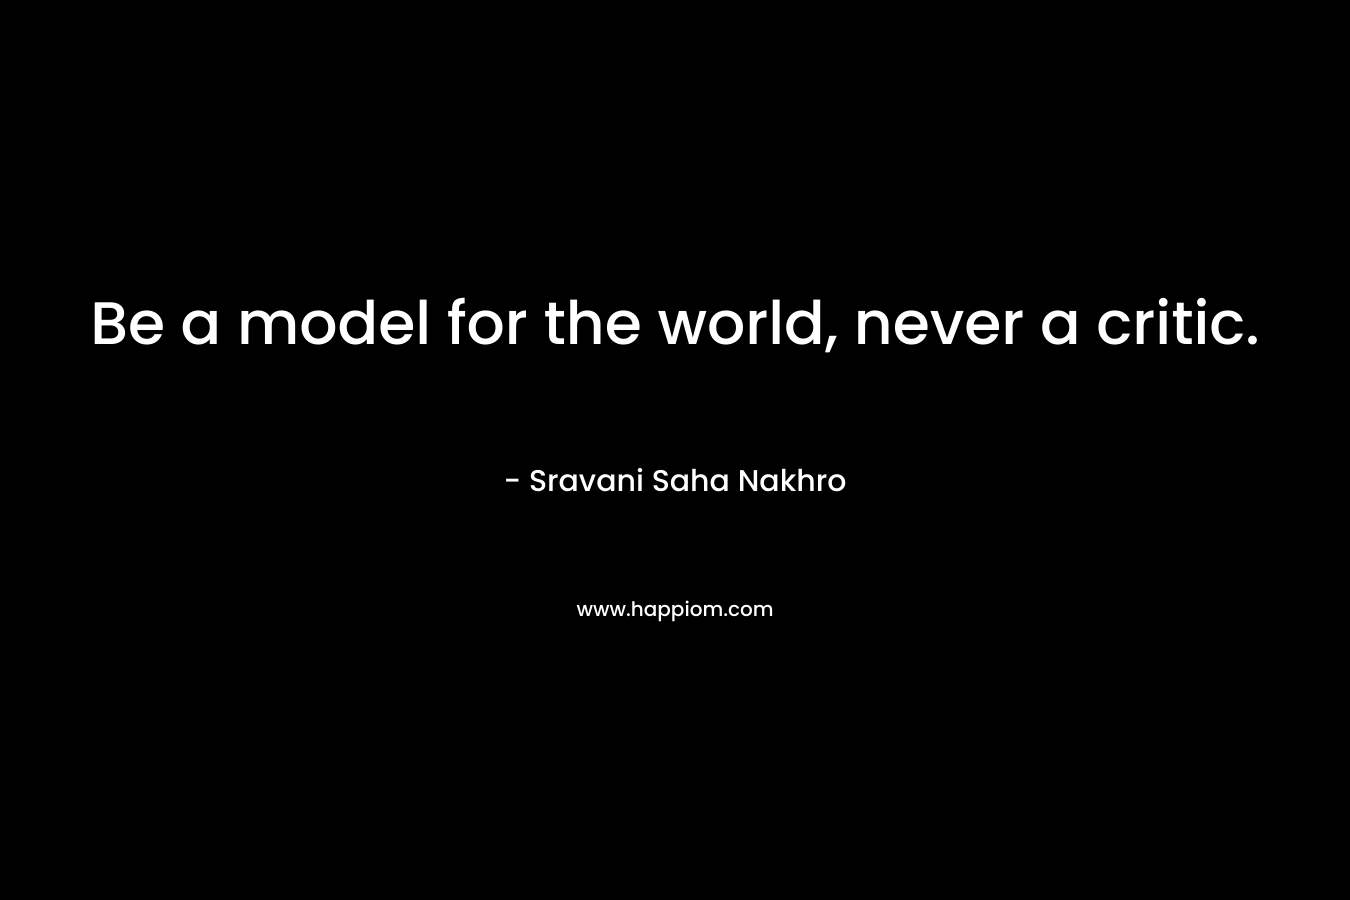 Be a model for the world, never a critic.